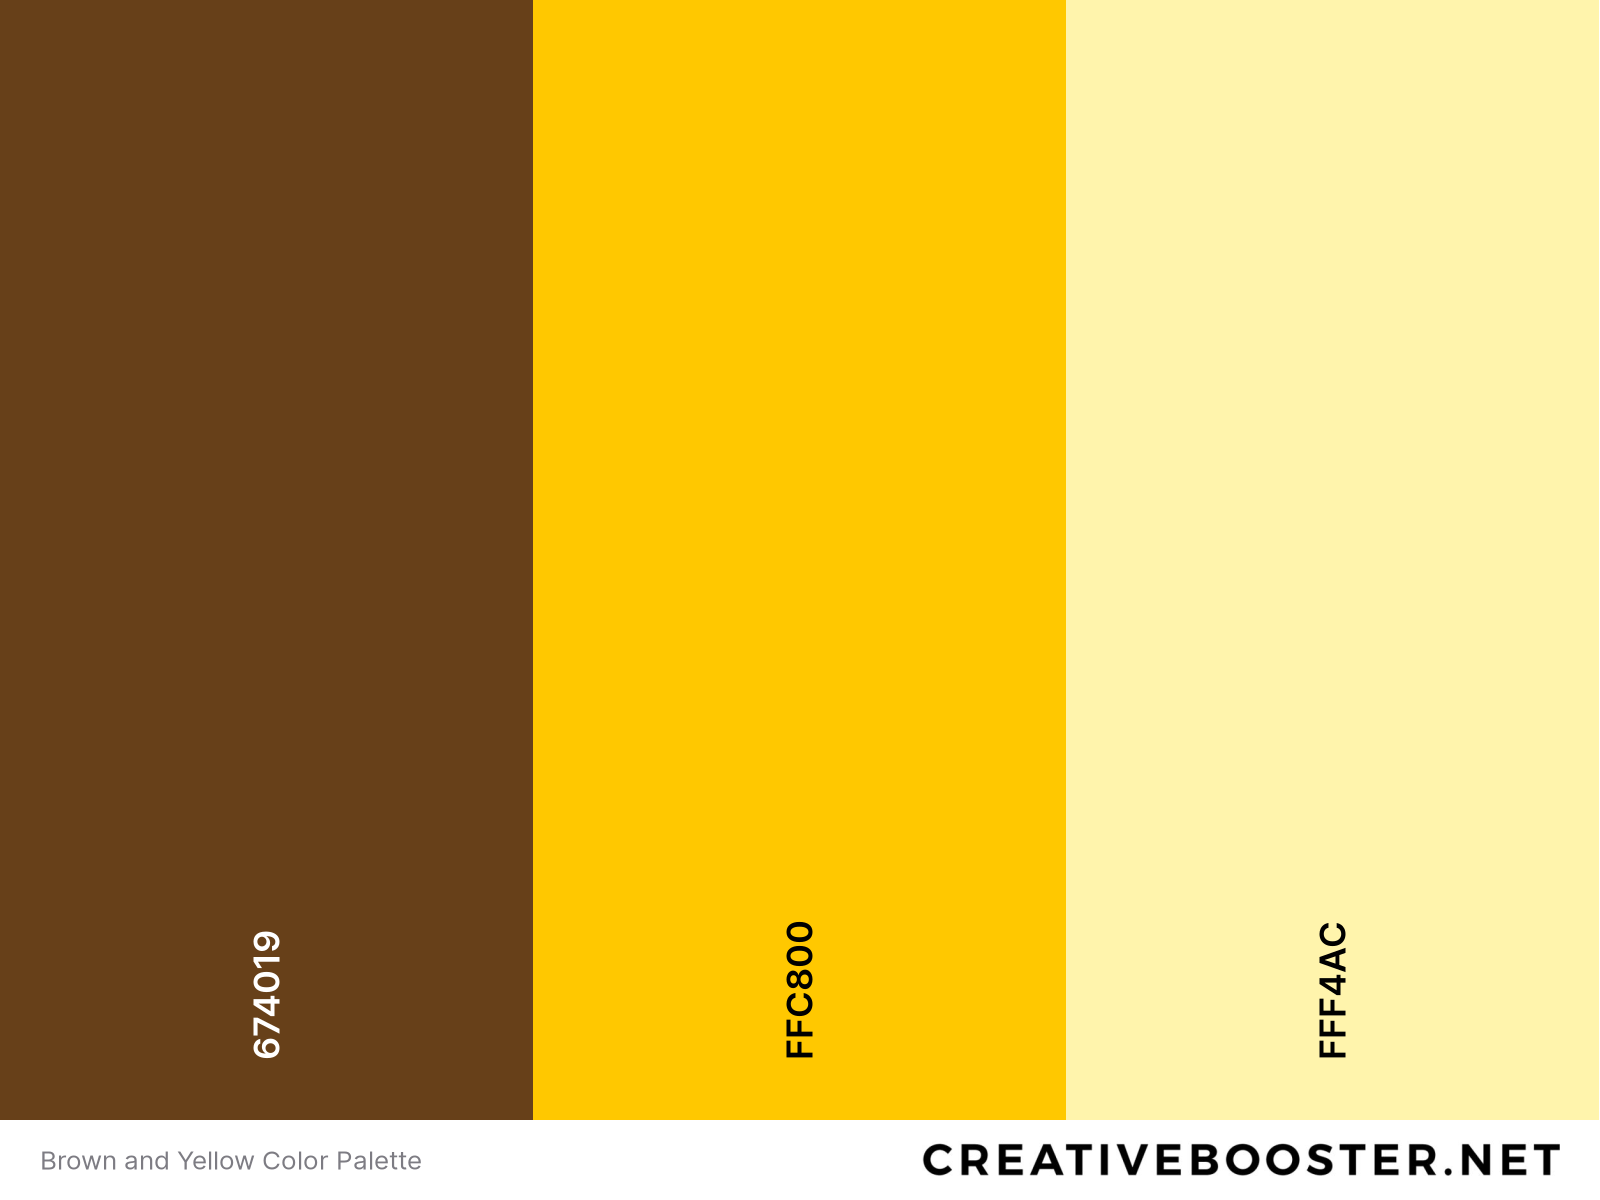 Brown and Yellow Color Palette